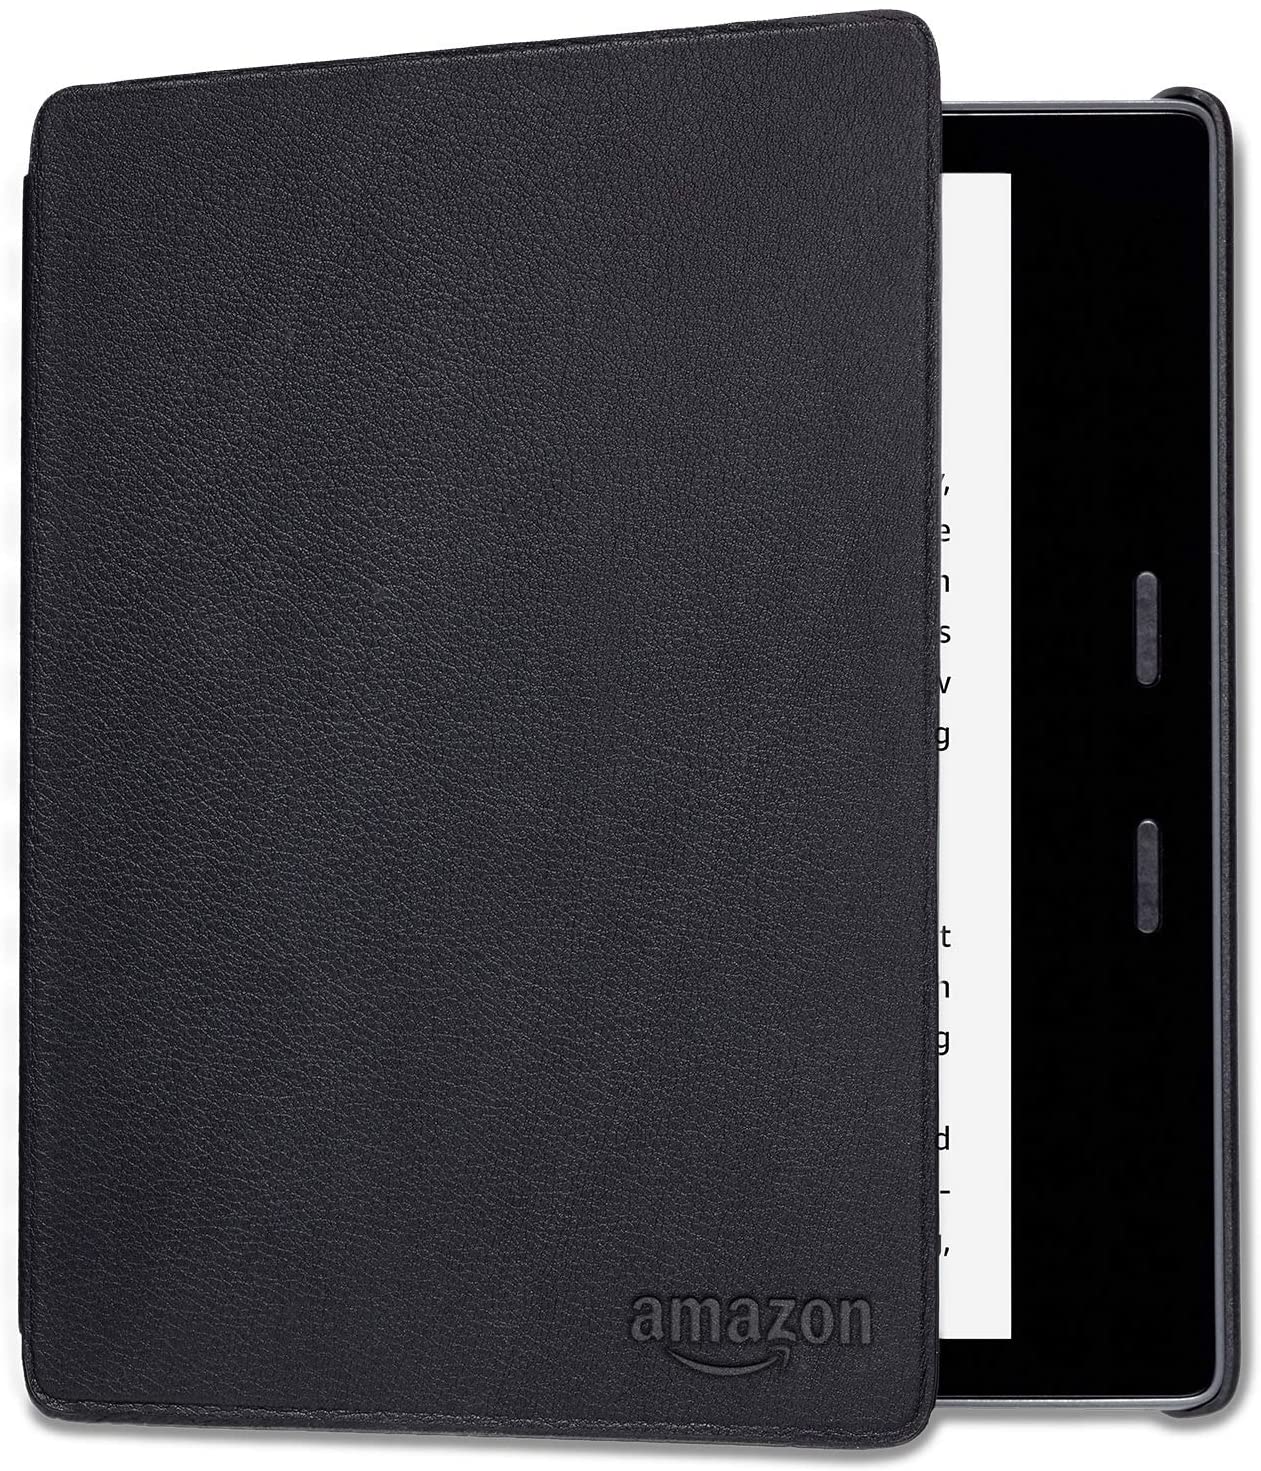 3. Black Kindle Oasis Leather Cover